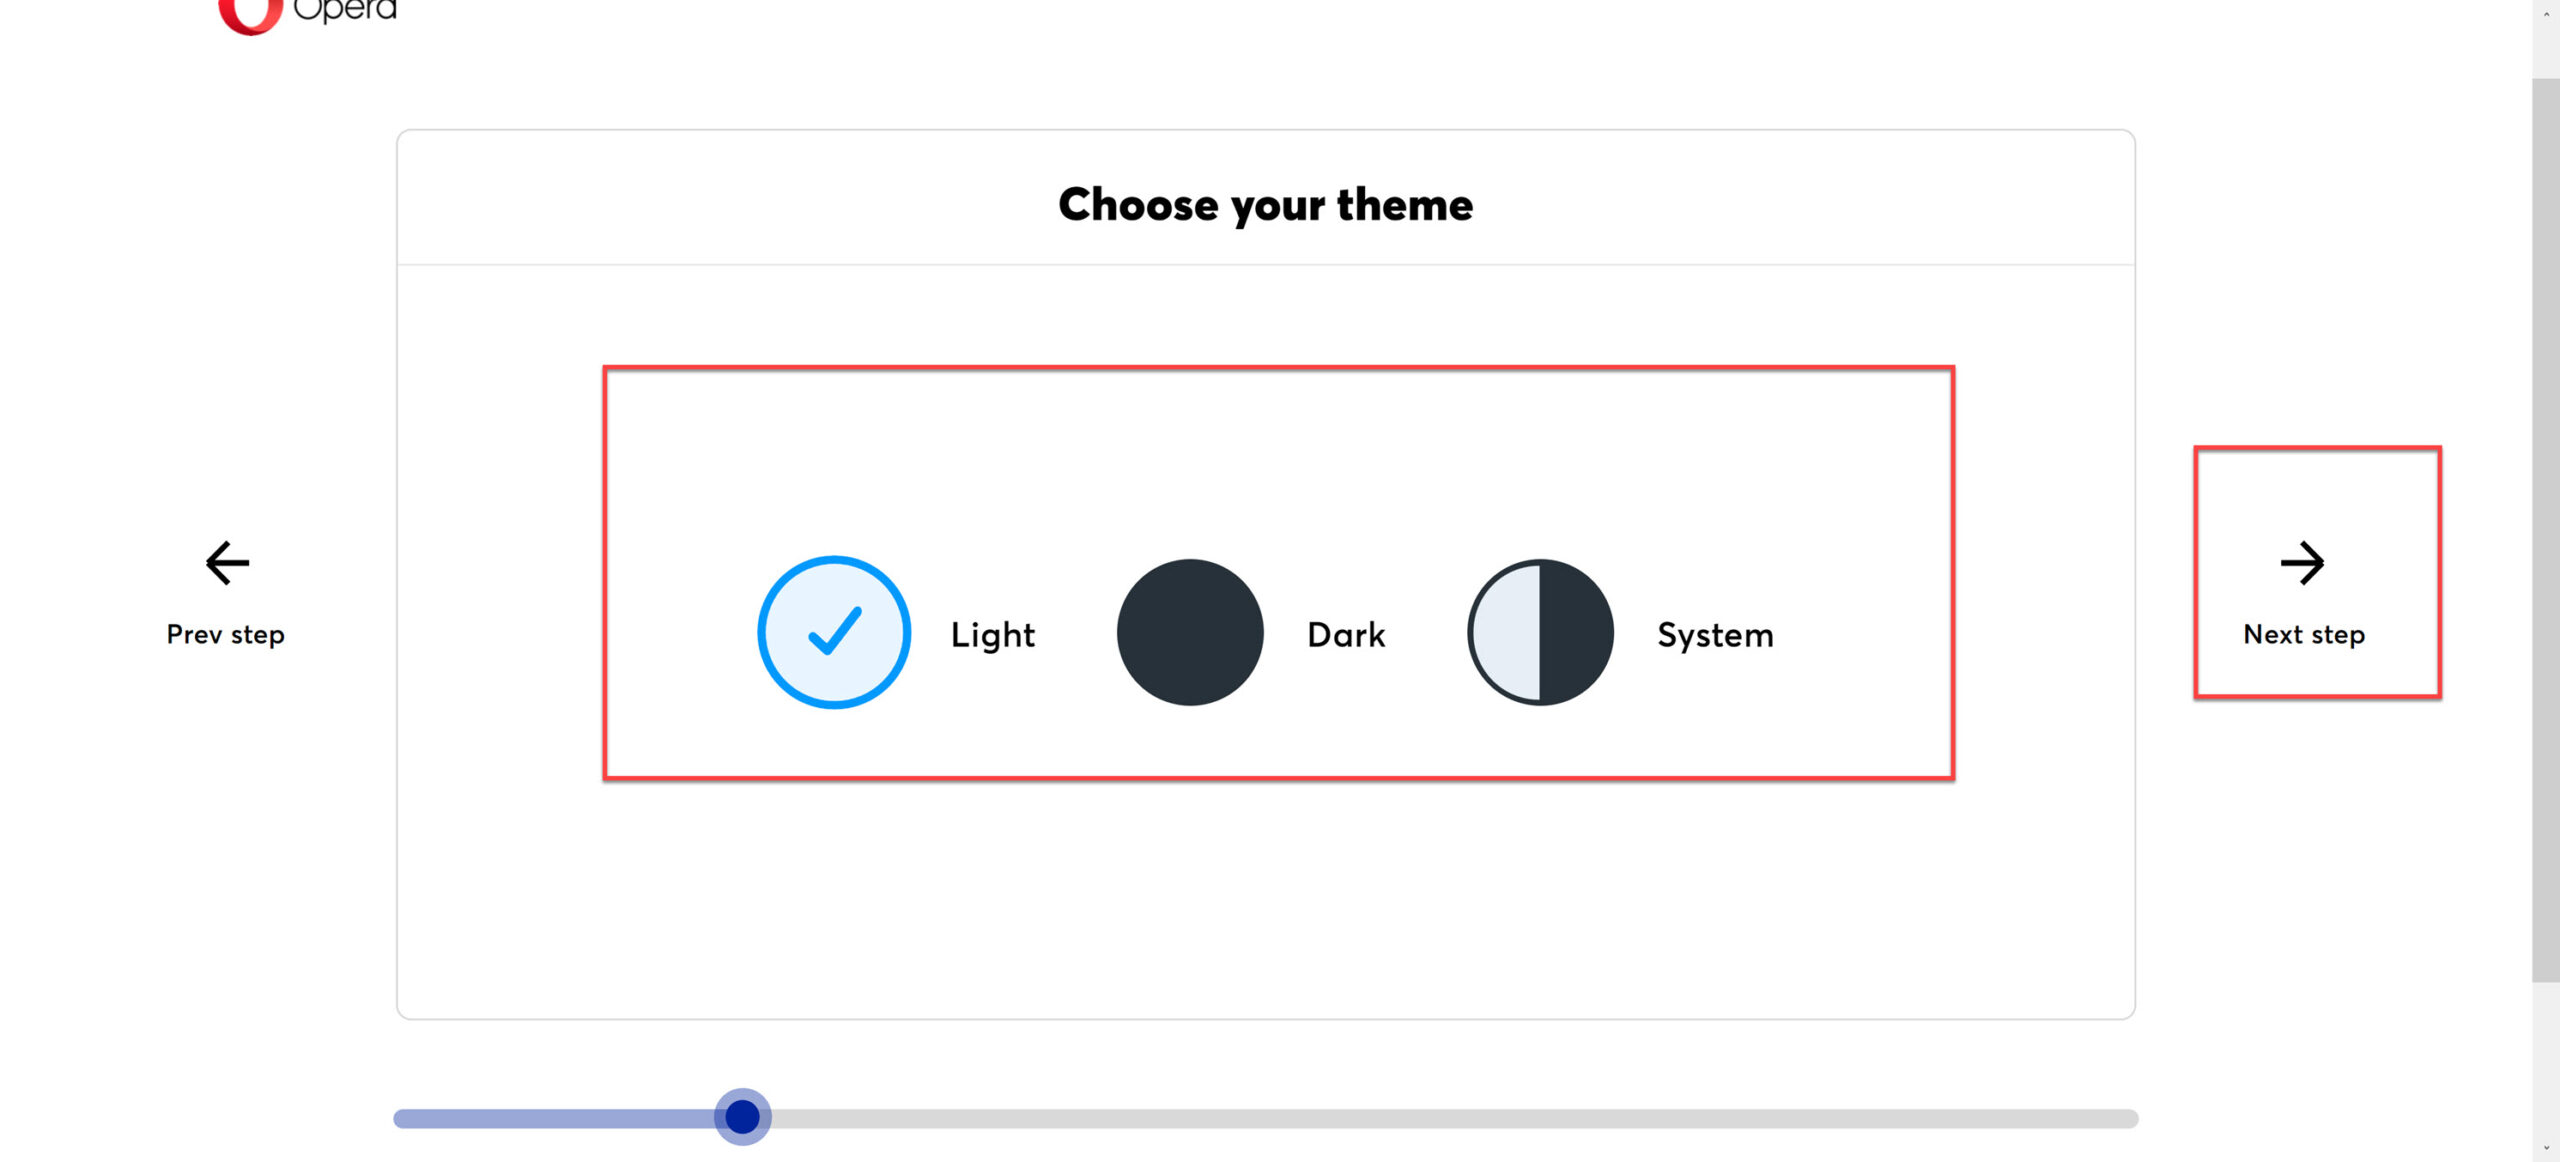 Select a Theme for your Opera